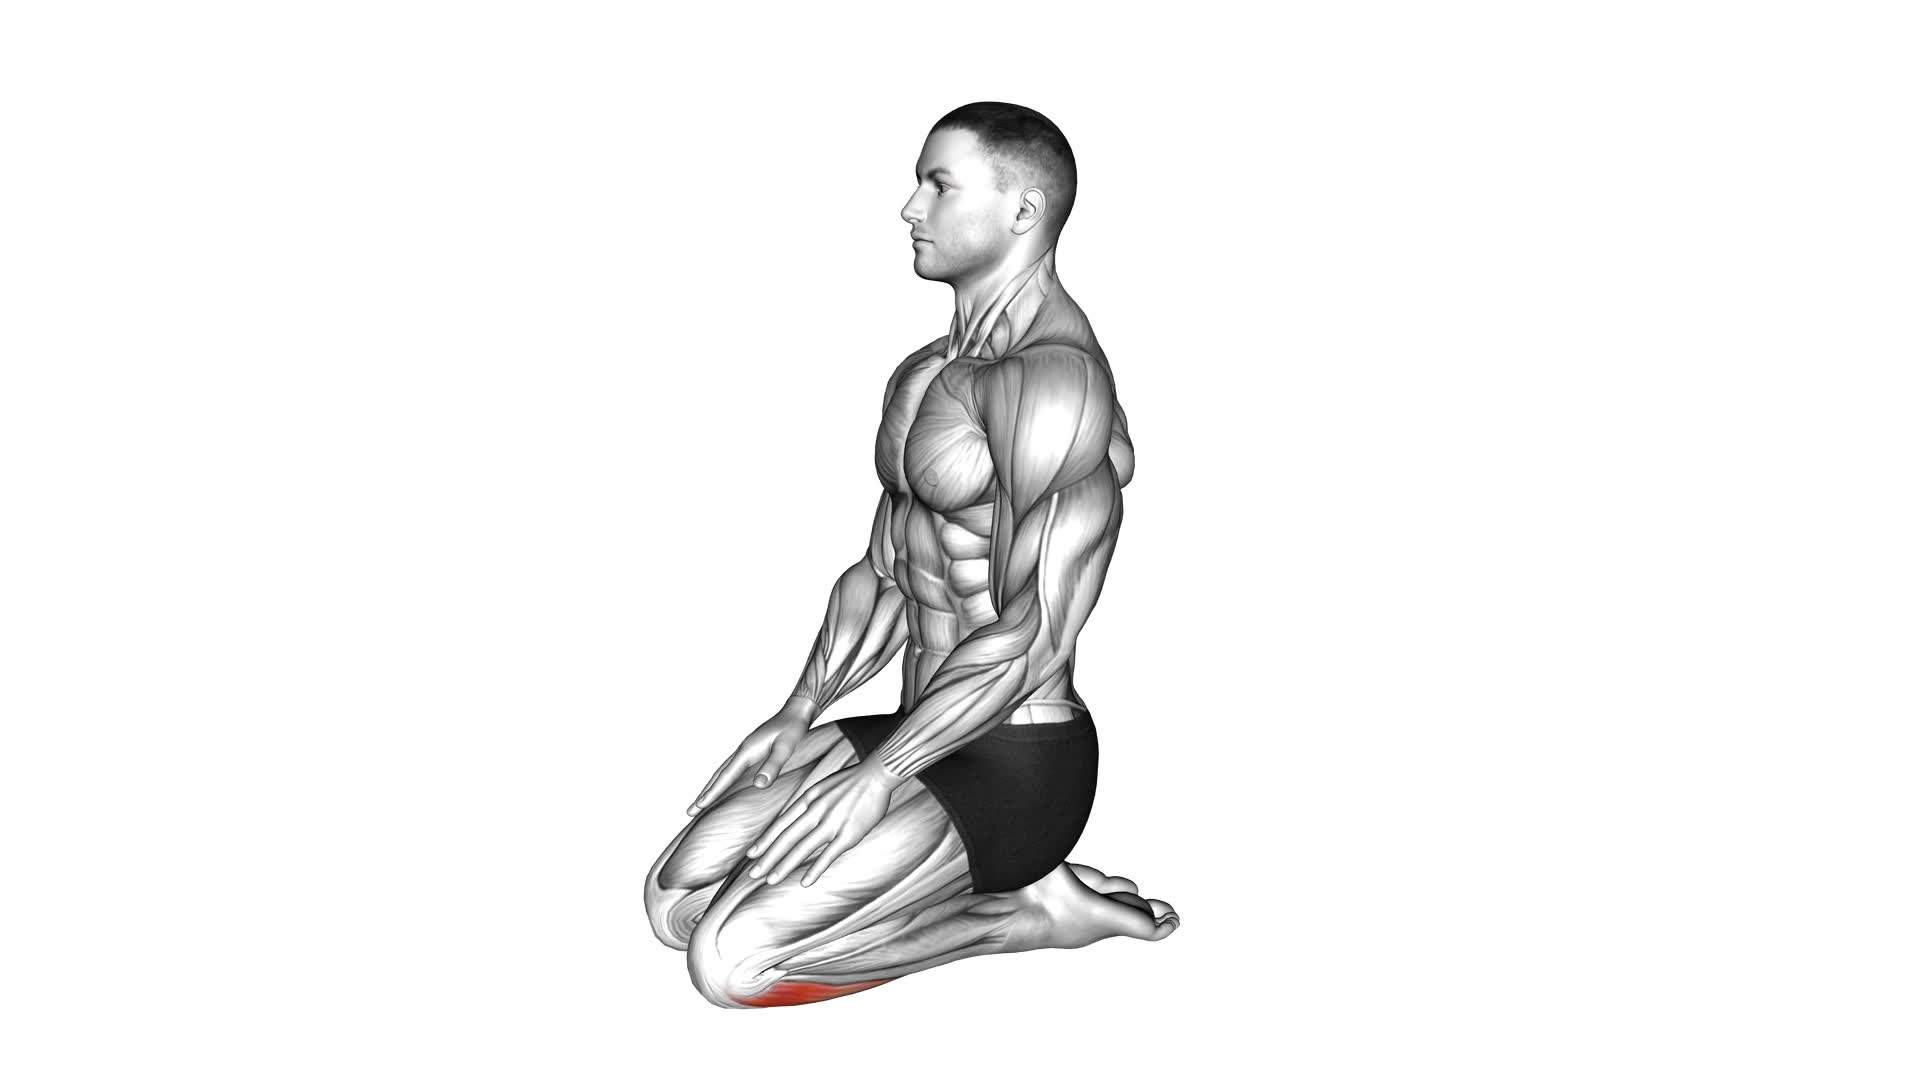 Seated Ankle Stretch - Video Exercise Guide & Tips